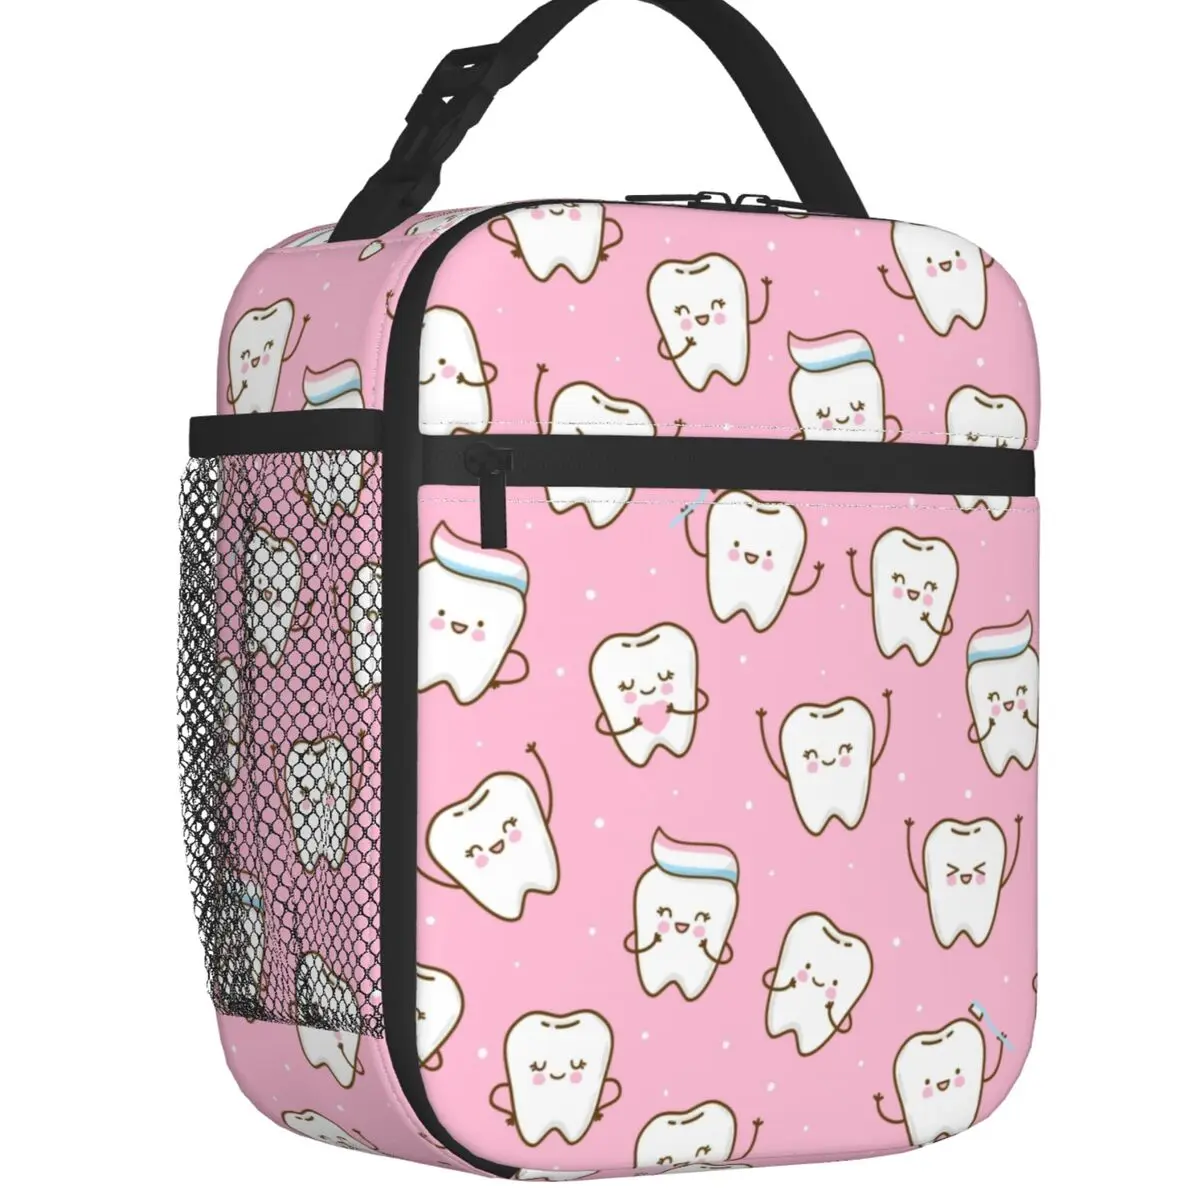 Dentist Cute Pattern Insulated Lunch Bag for Women Waterproof Tooth Medical Cooler Thermal Lunch Tote Office Picnic Travel